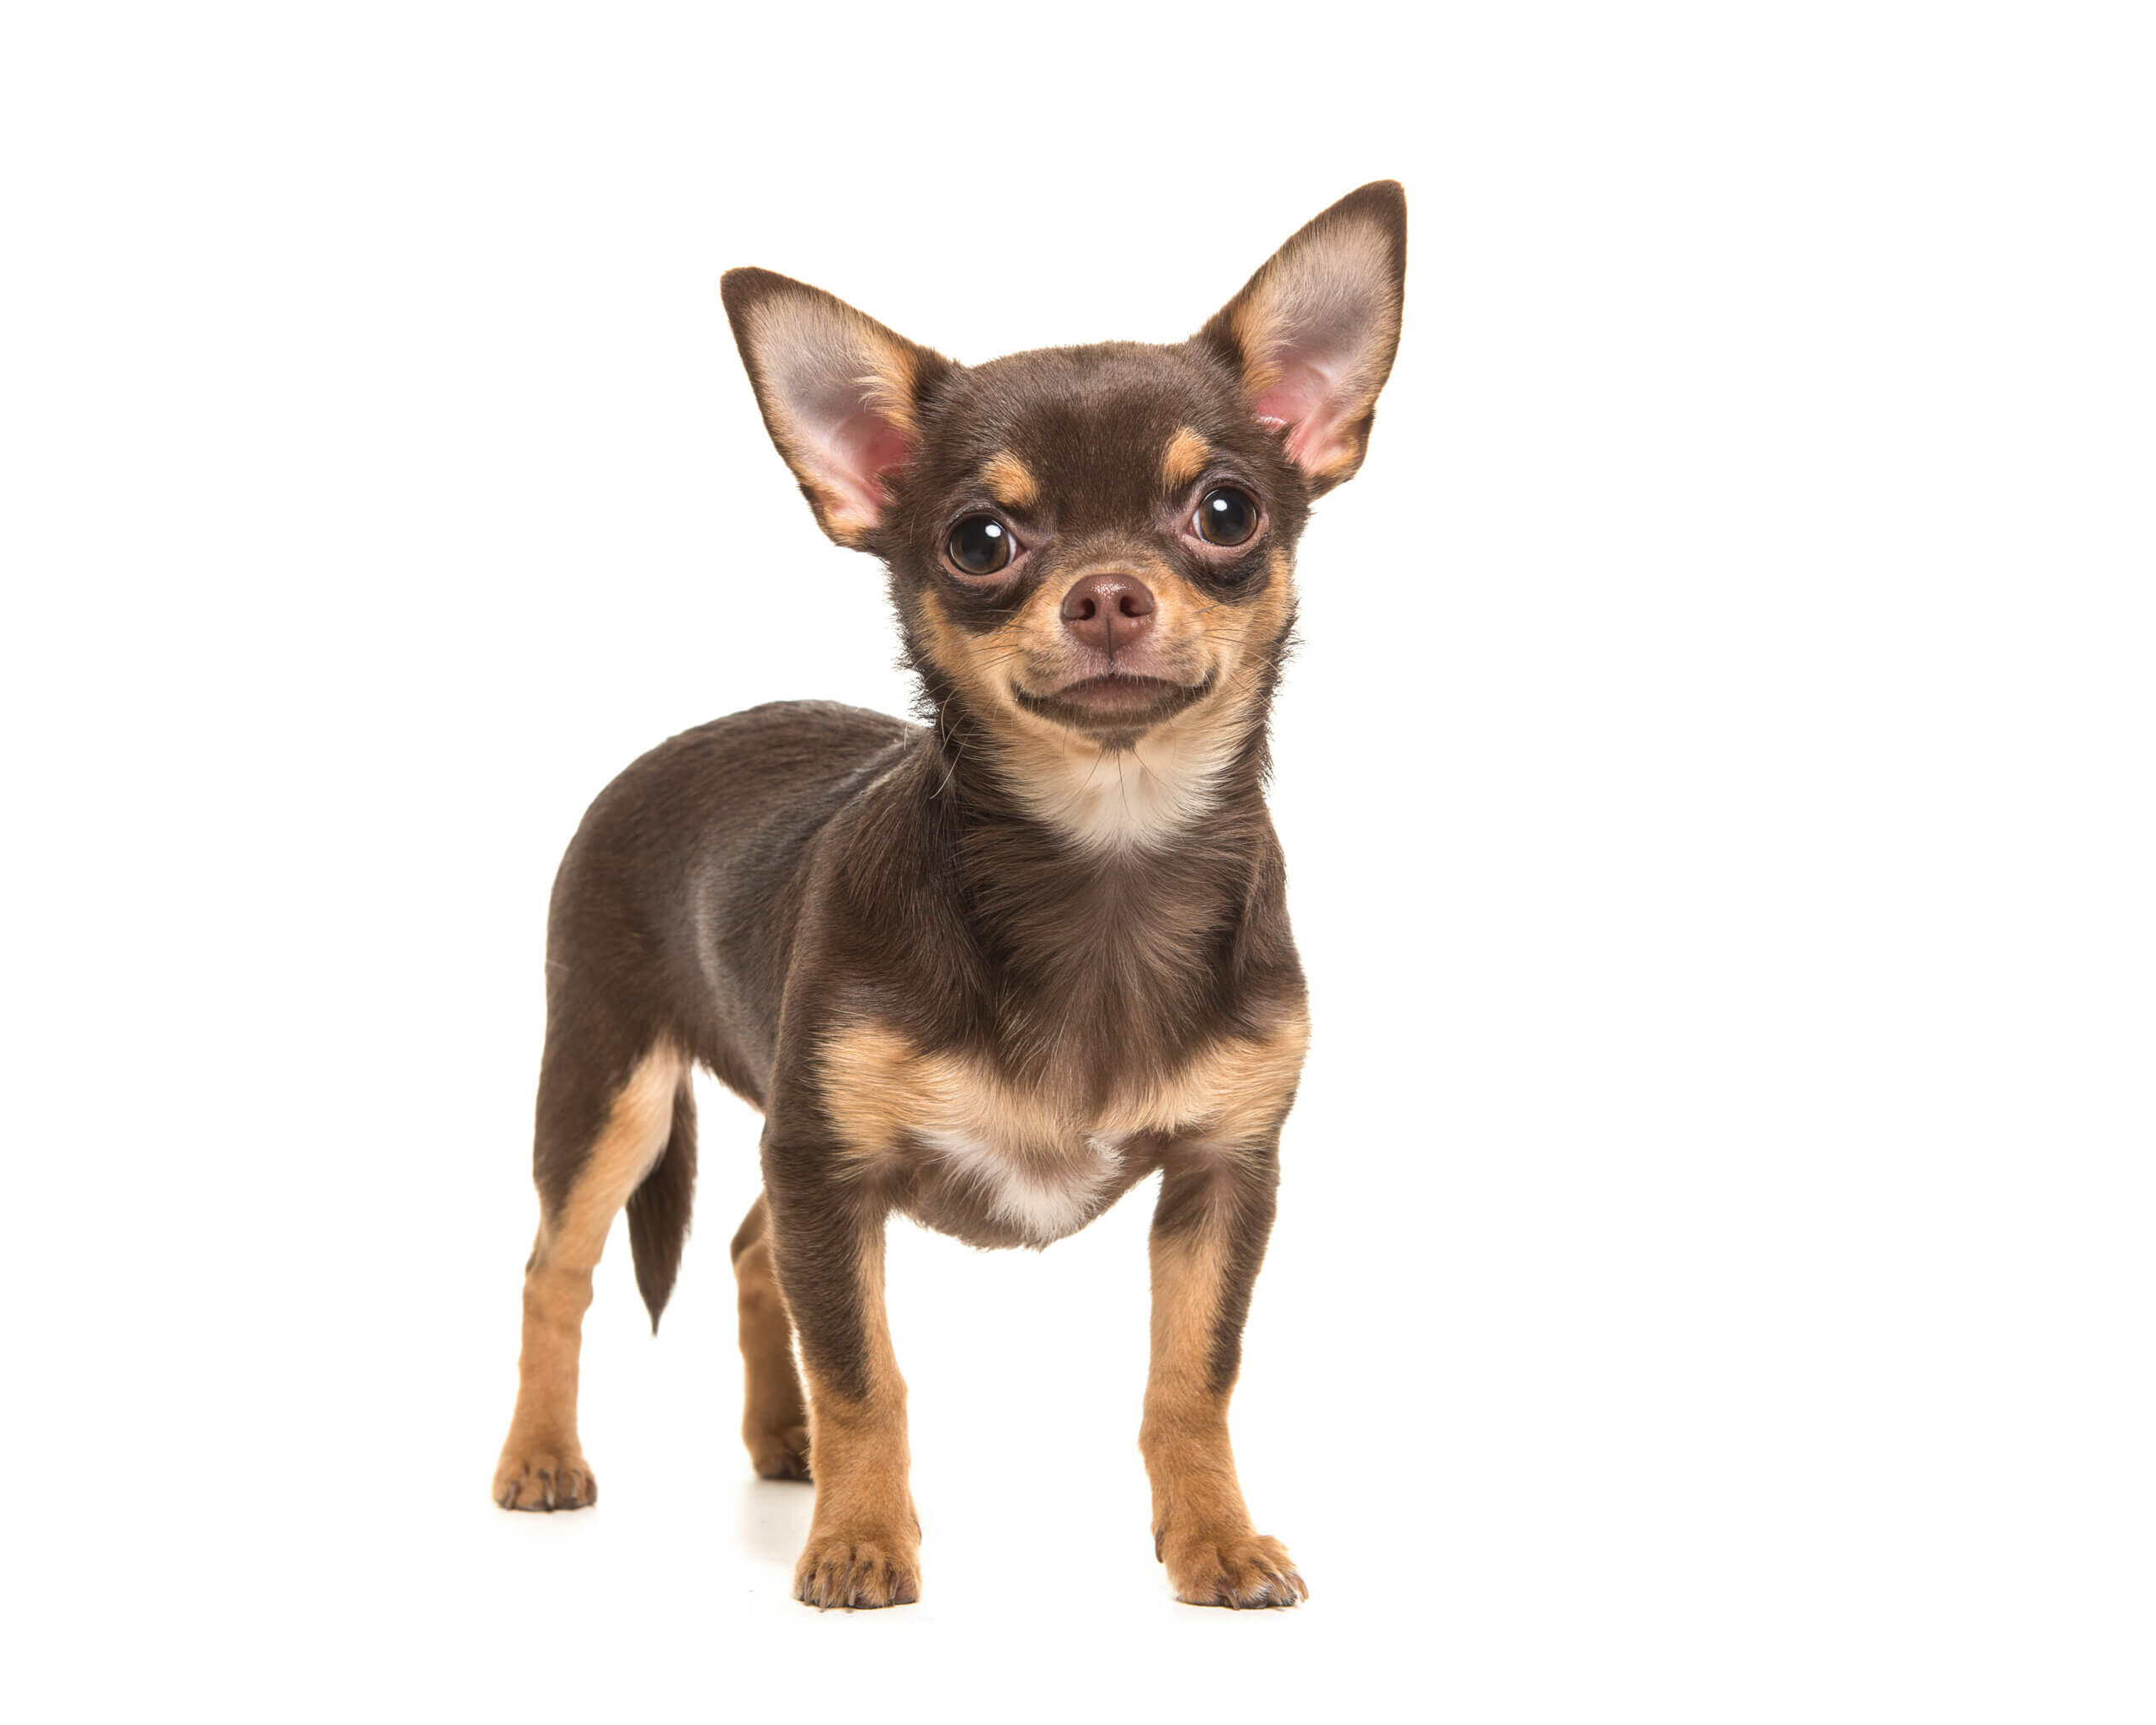 https://truckerdaily.com/wp-content/uploads/2021/12/Chihuahua-for-truck-drivers-scaled.jpeg